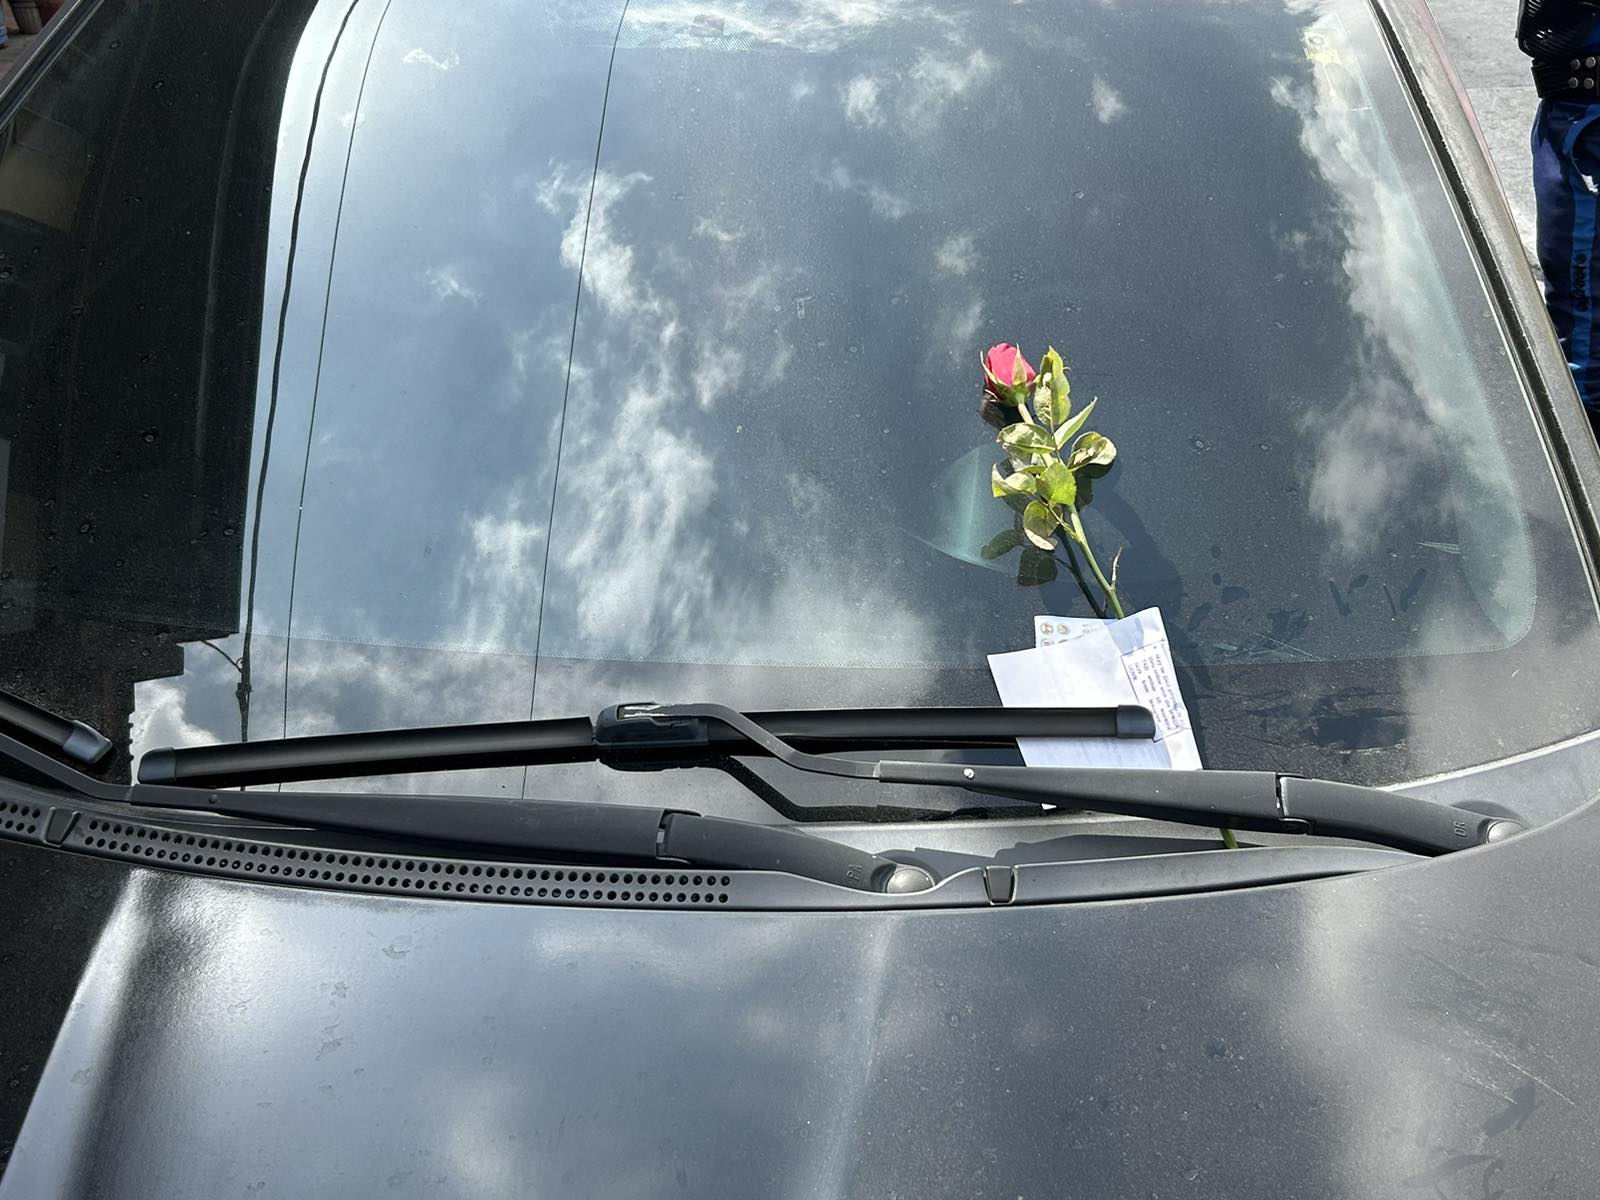 Personnel from the Metropolitan Manila Development Authority (MMDA) surprised traffic law and city ordinance violators not just with citation tickets but also with red roses on Valentine’s Day.